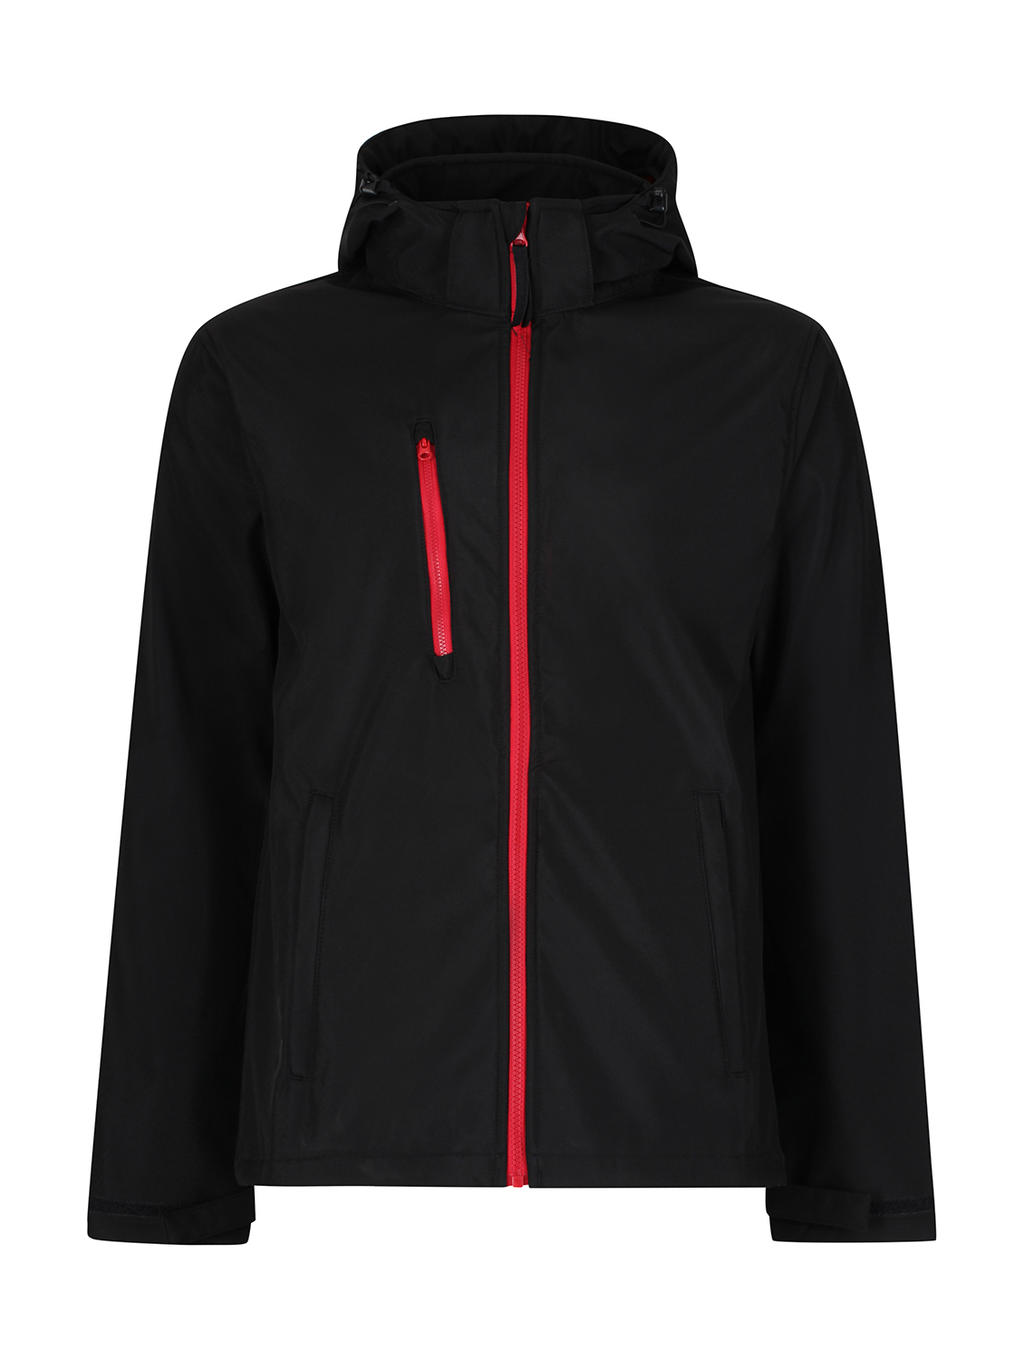  Venturer 3-Layer Hooded Softshell Jacket in Farbe Black/Red